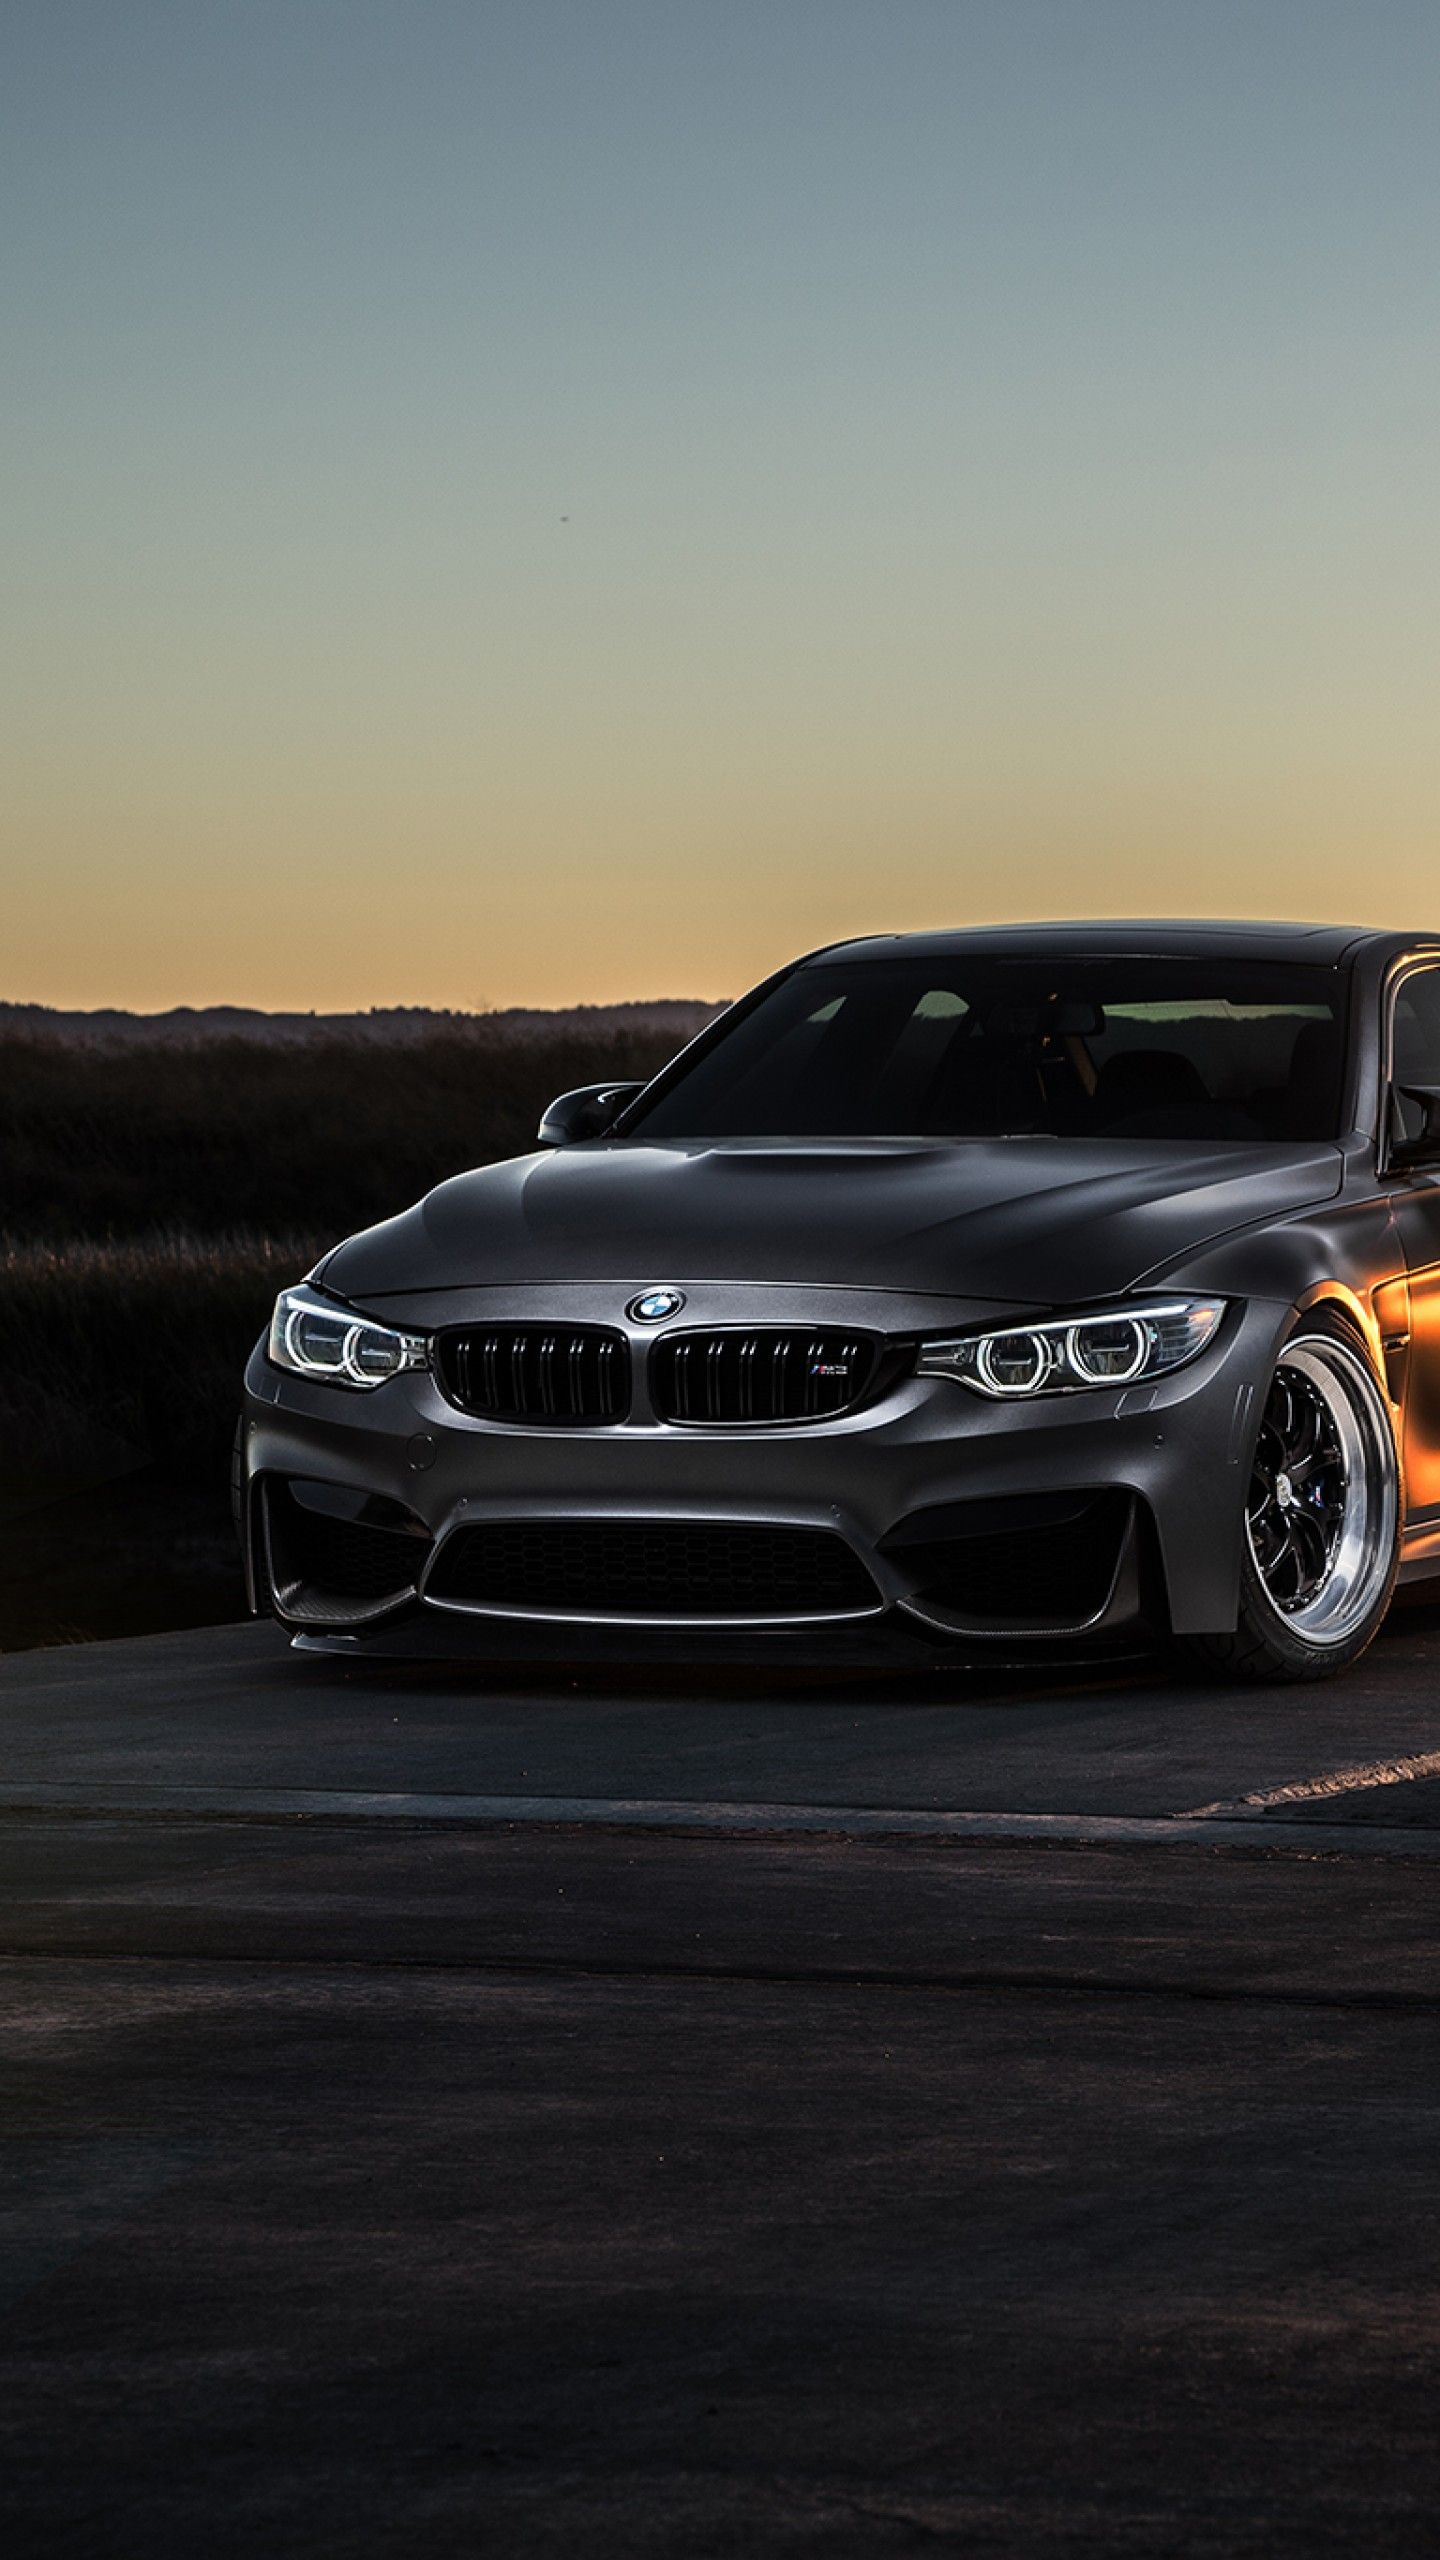 Wallpaper BMW F80 M Sunset, HD, Automotive,. Wallpaper for iPhone, Android, Mobile and Desktop